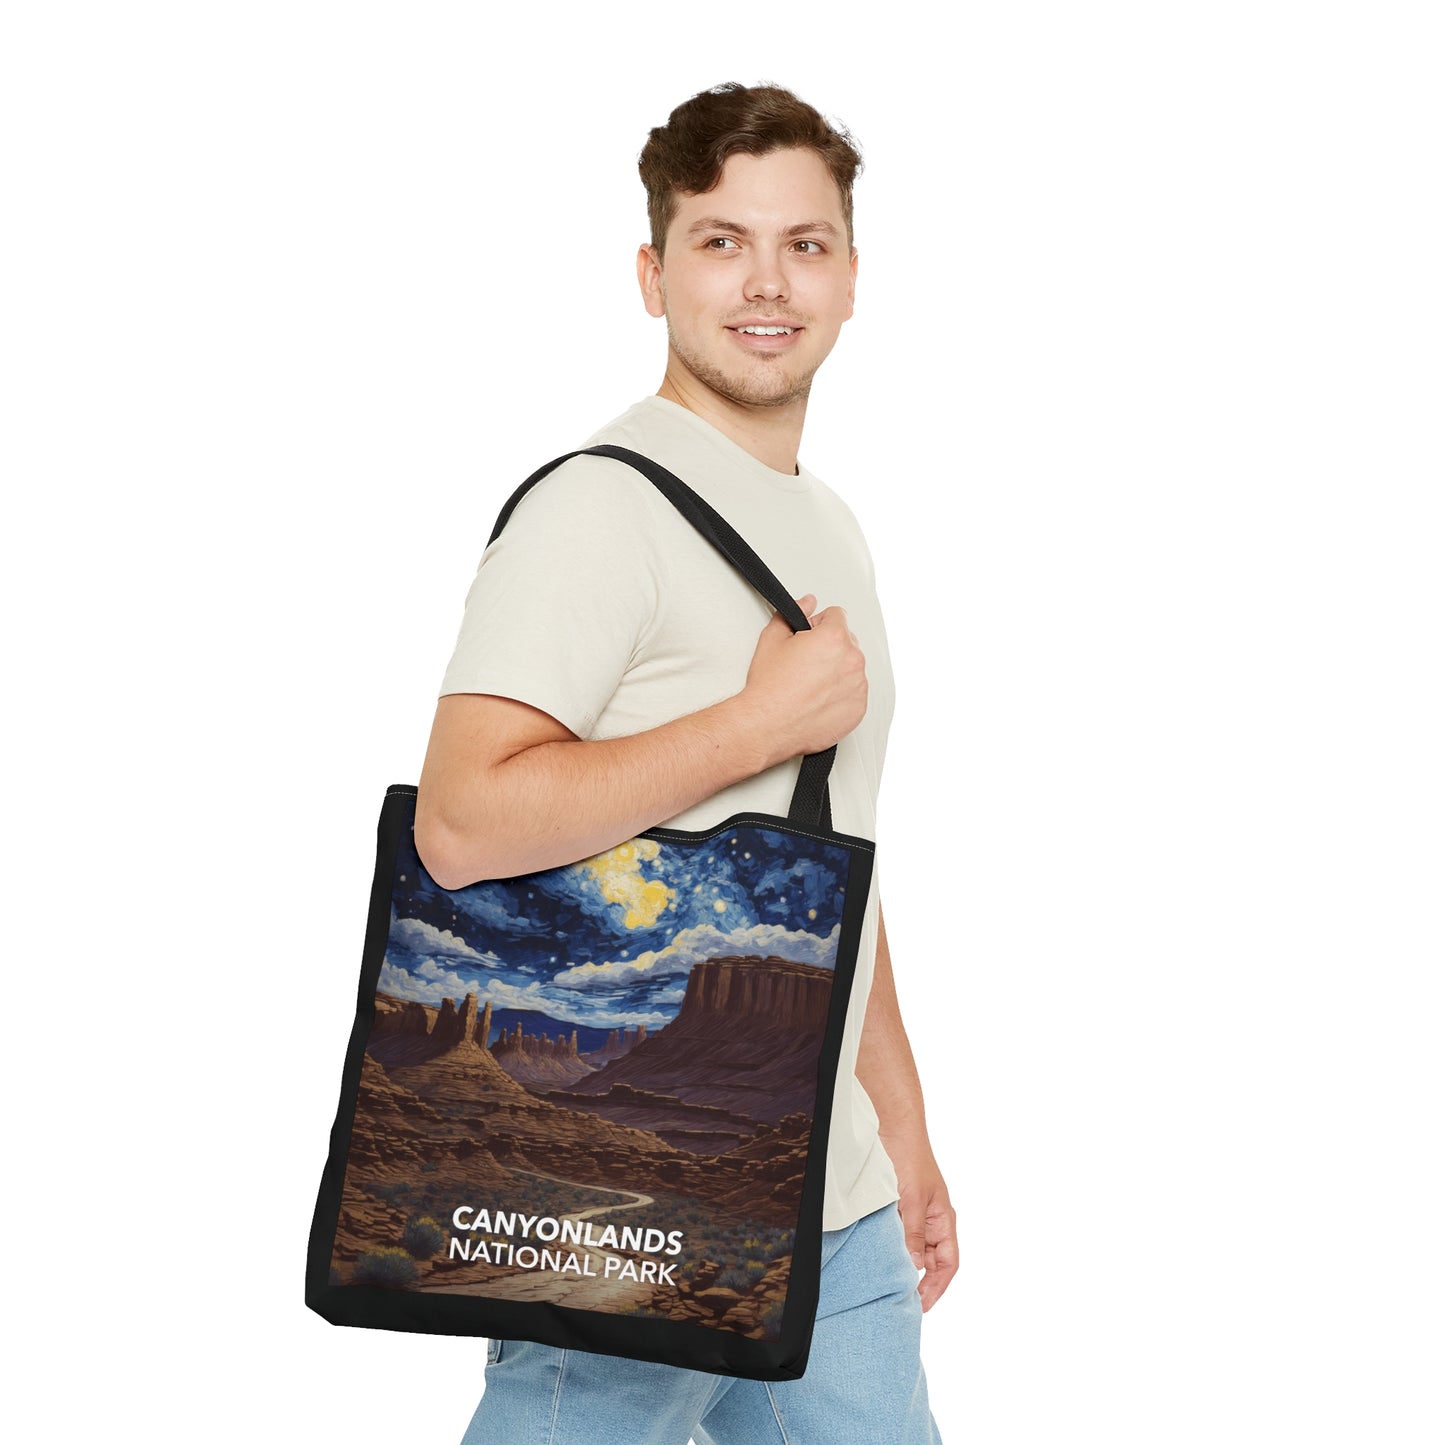 Canyonlands National Park Tote Bag - The Starry Night